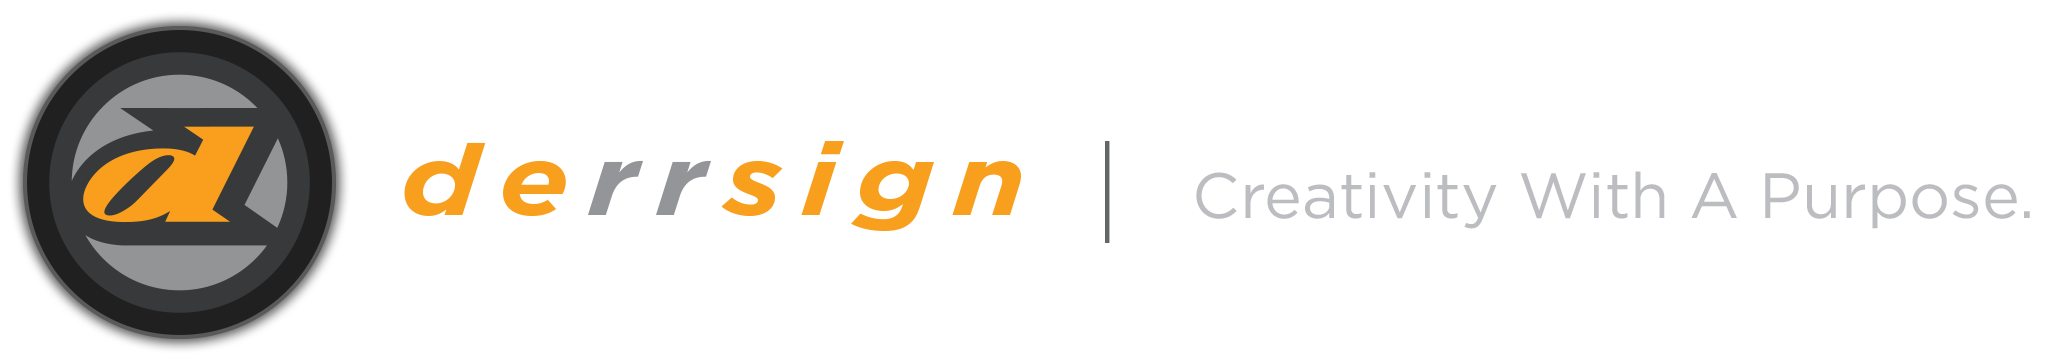 Derrsign - Creativity with a Purpose